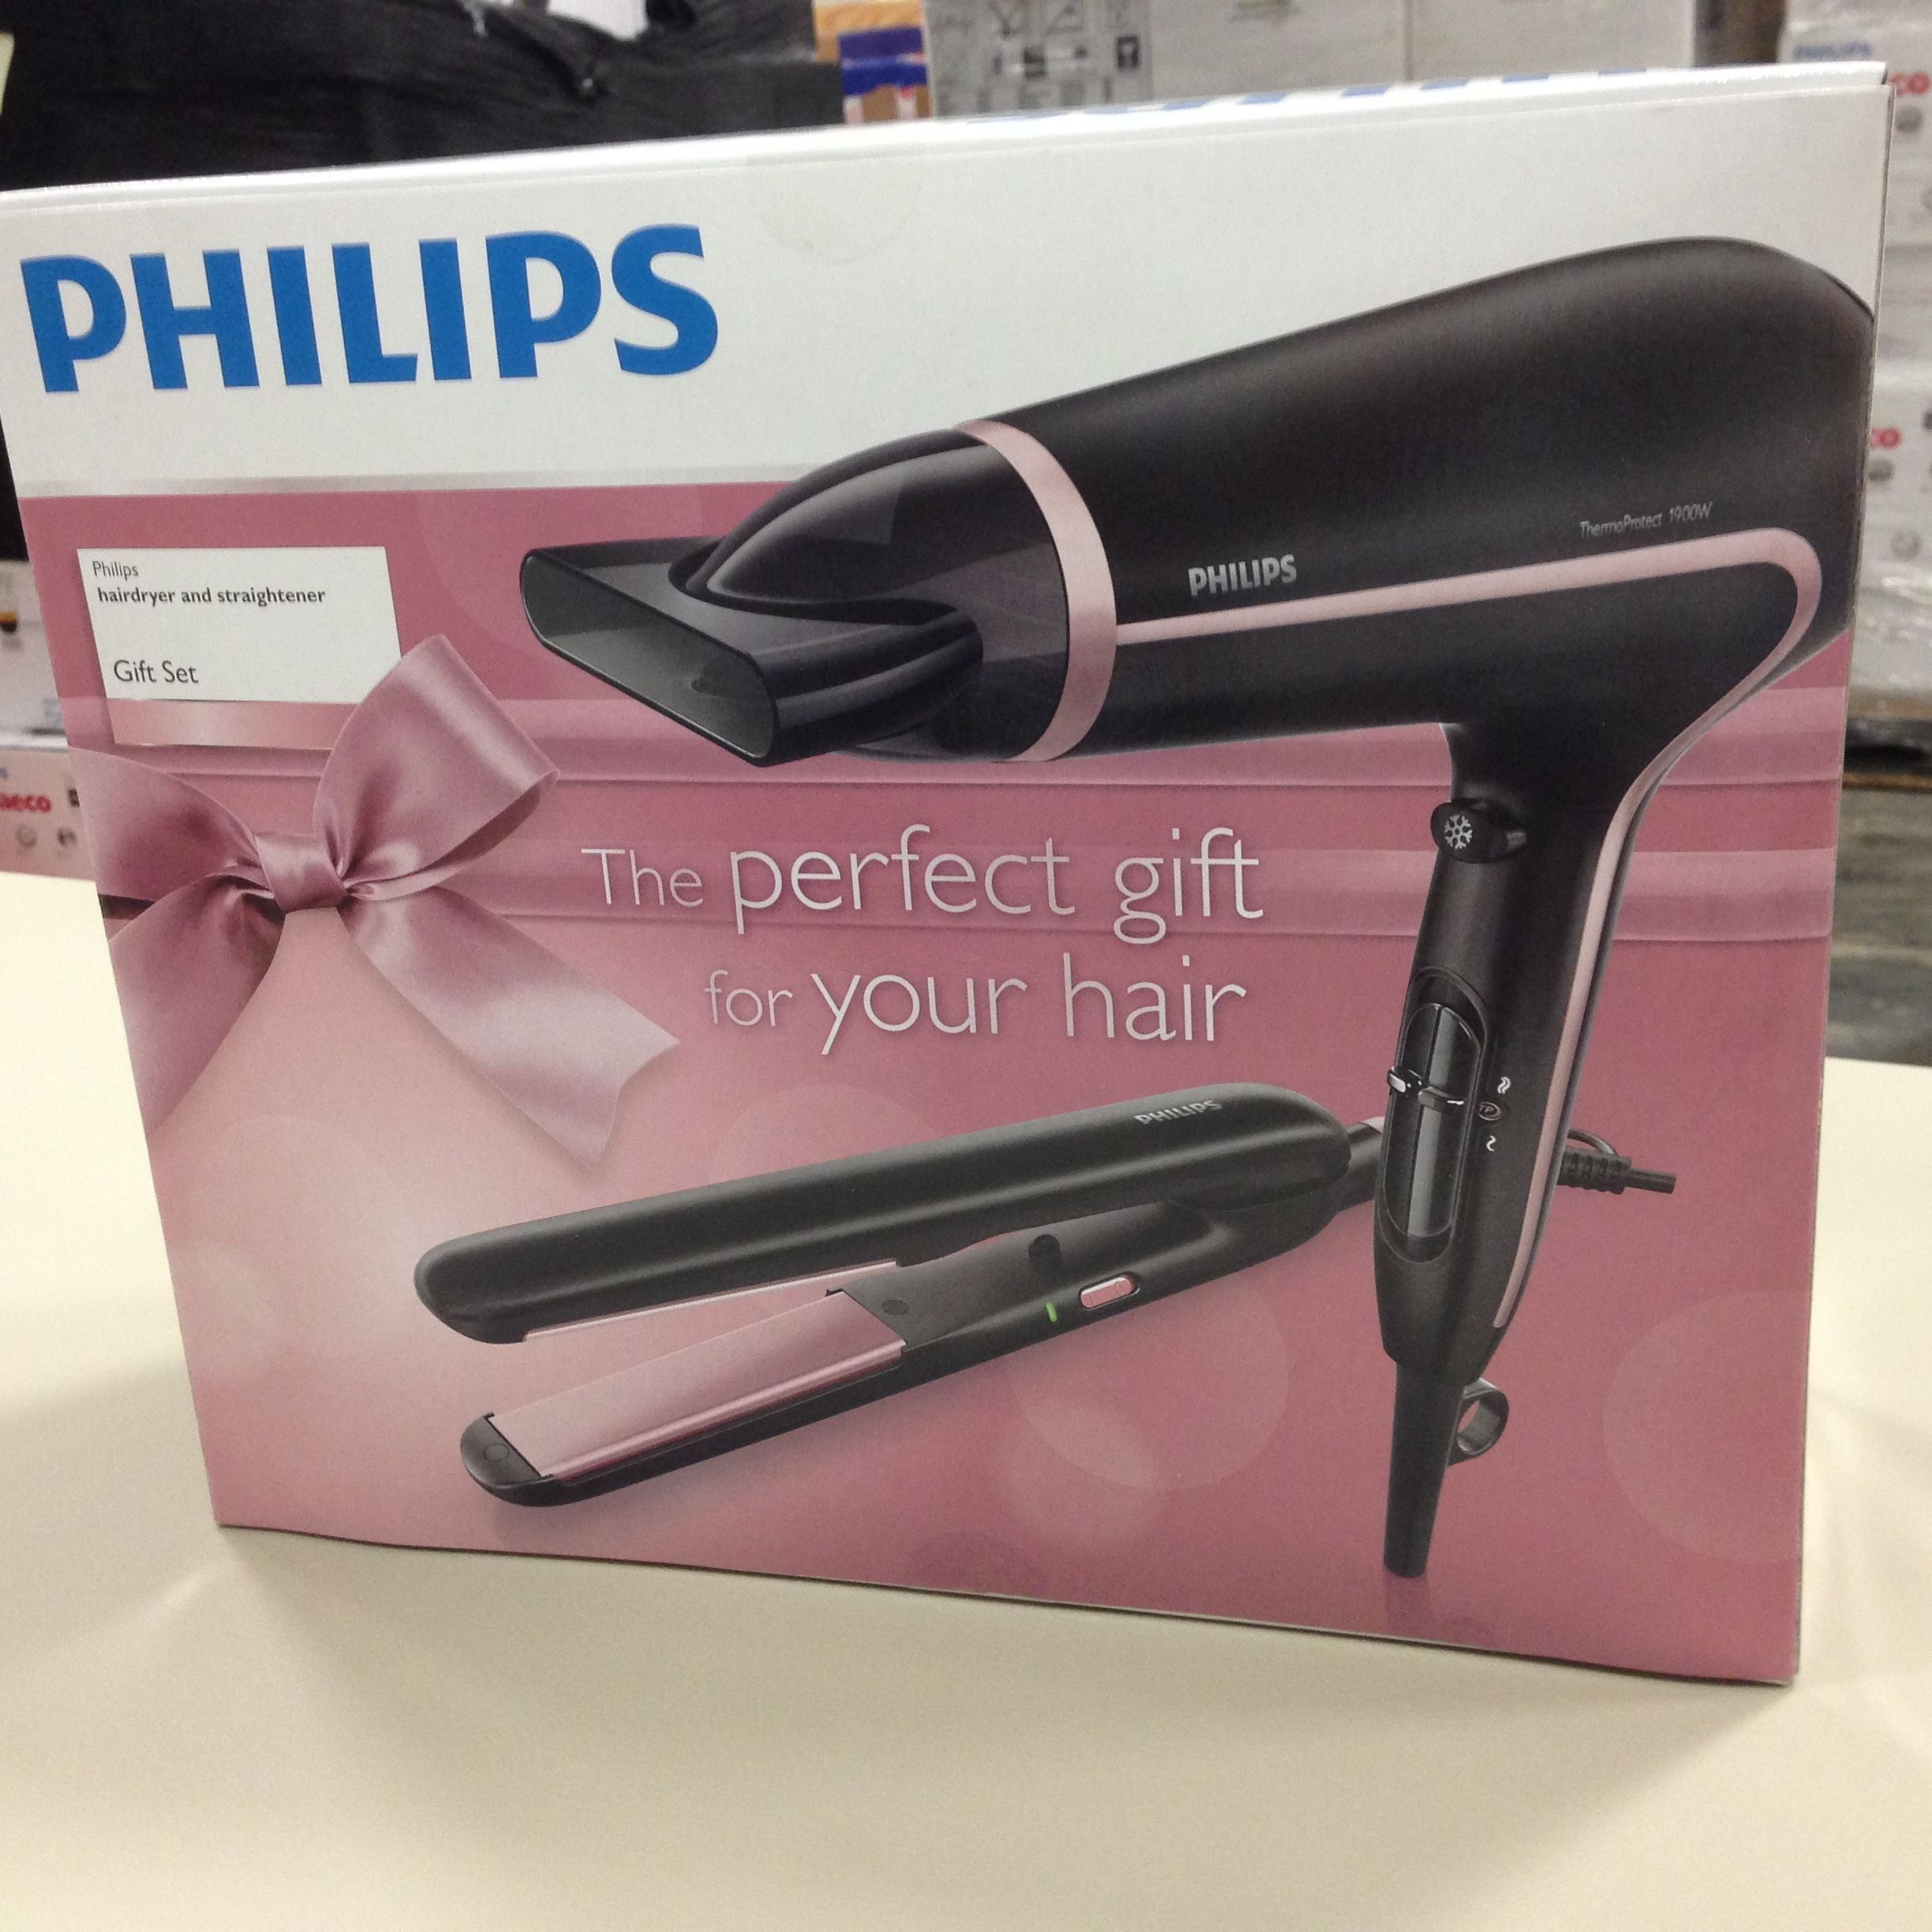 Review of the best Philips hair dryers